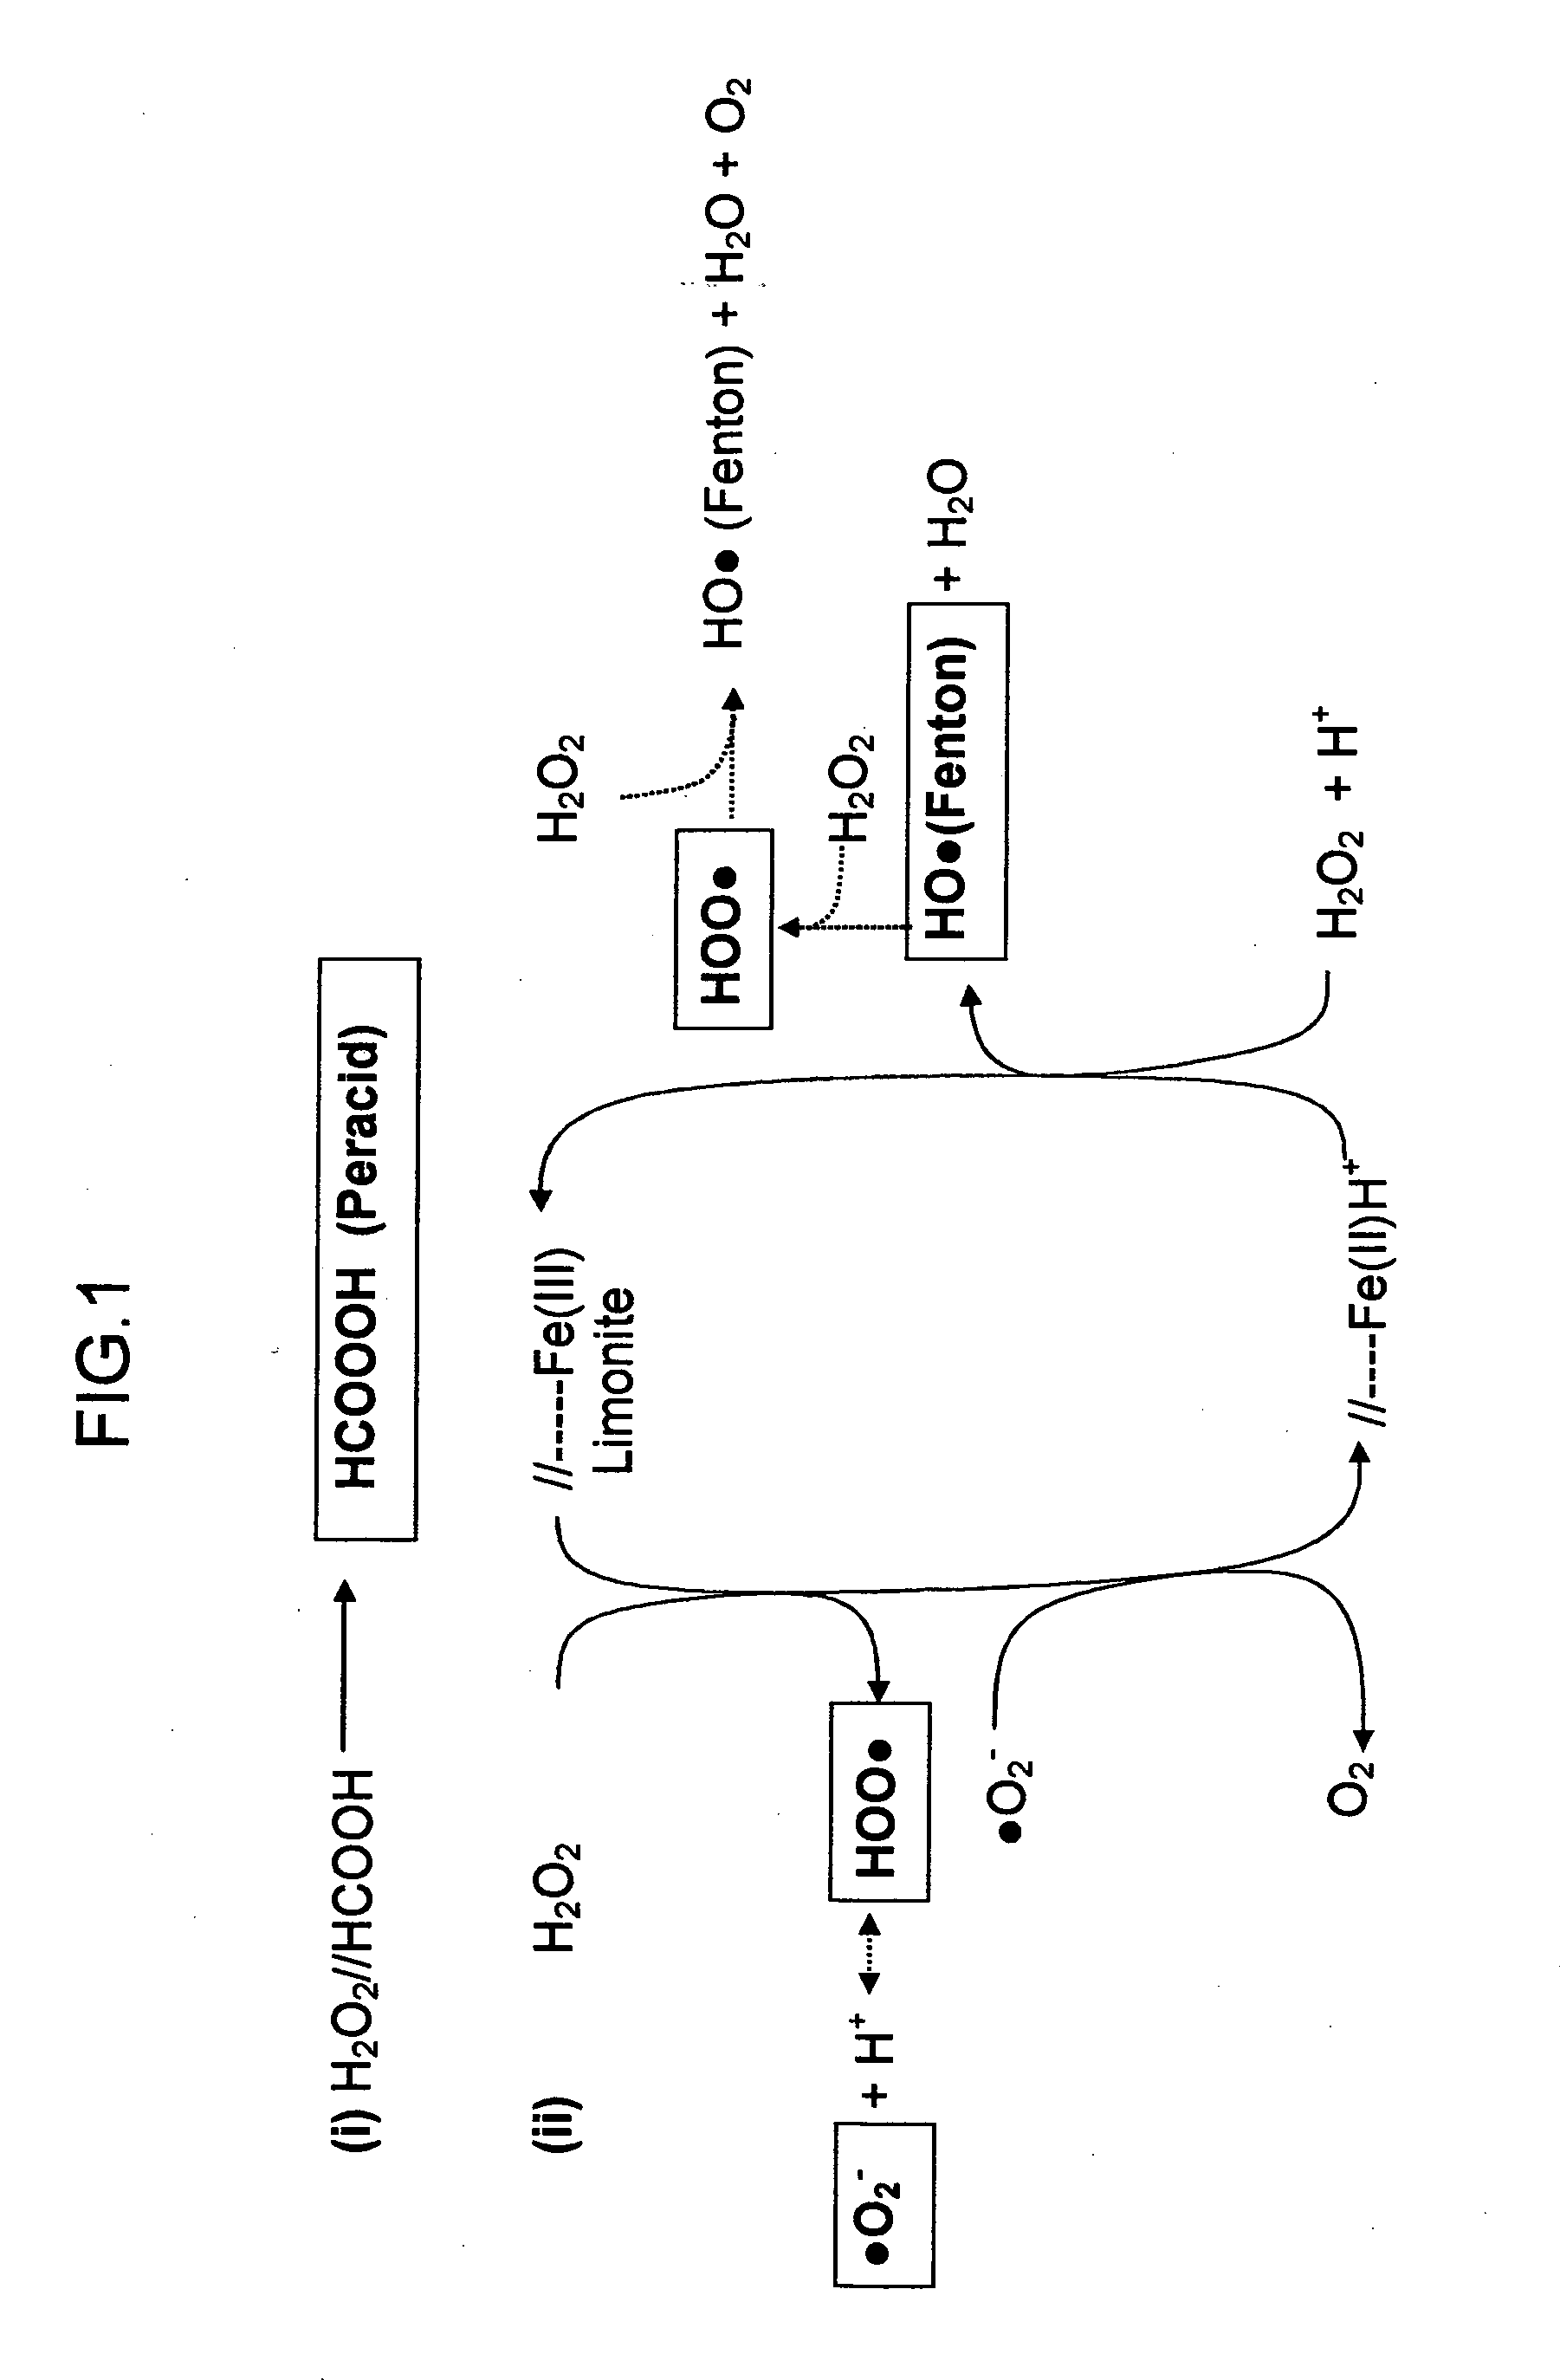 Process for the extractive oxidation of contaminants from raw fuel streams catalyzed by iron oxides